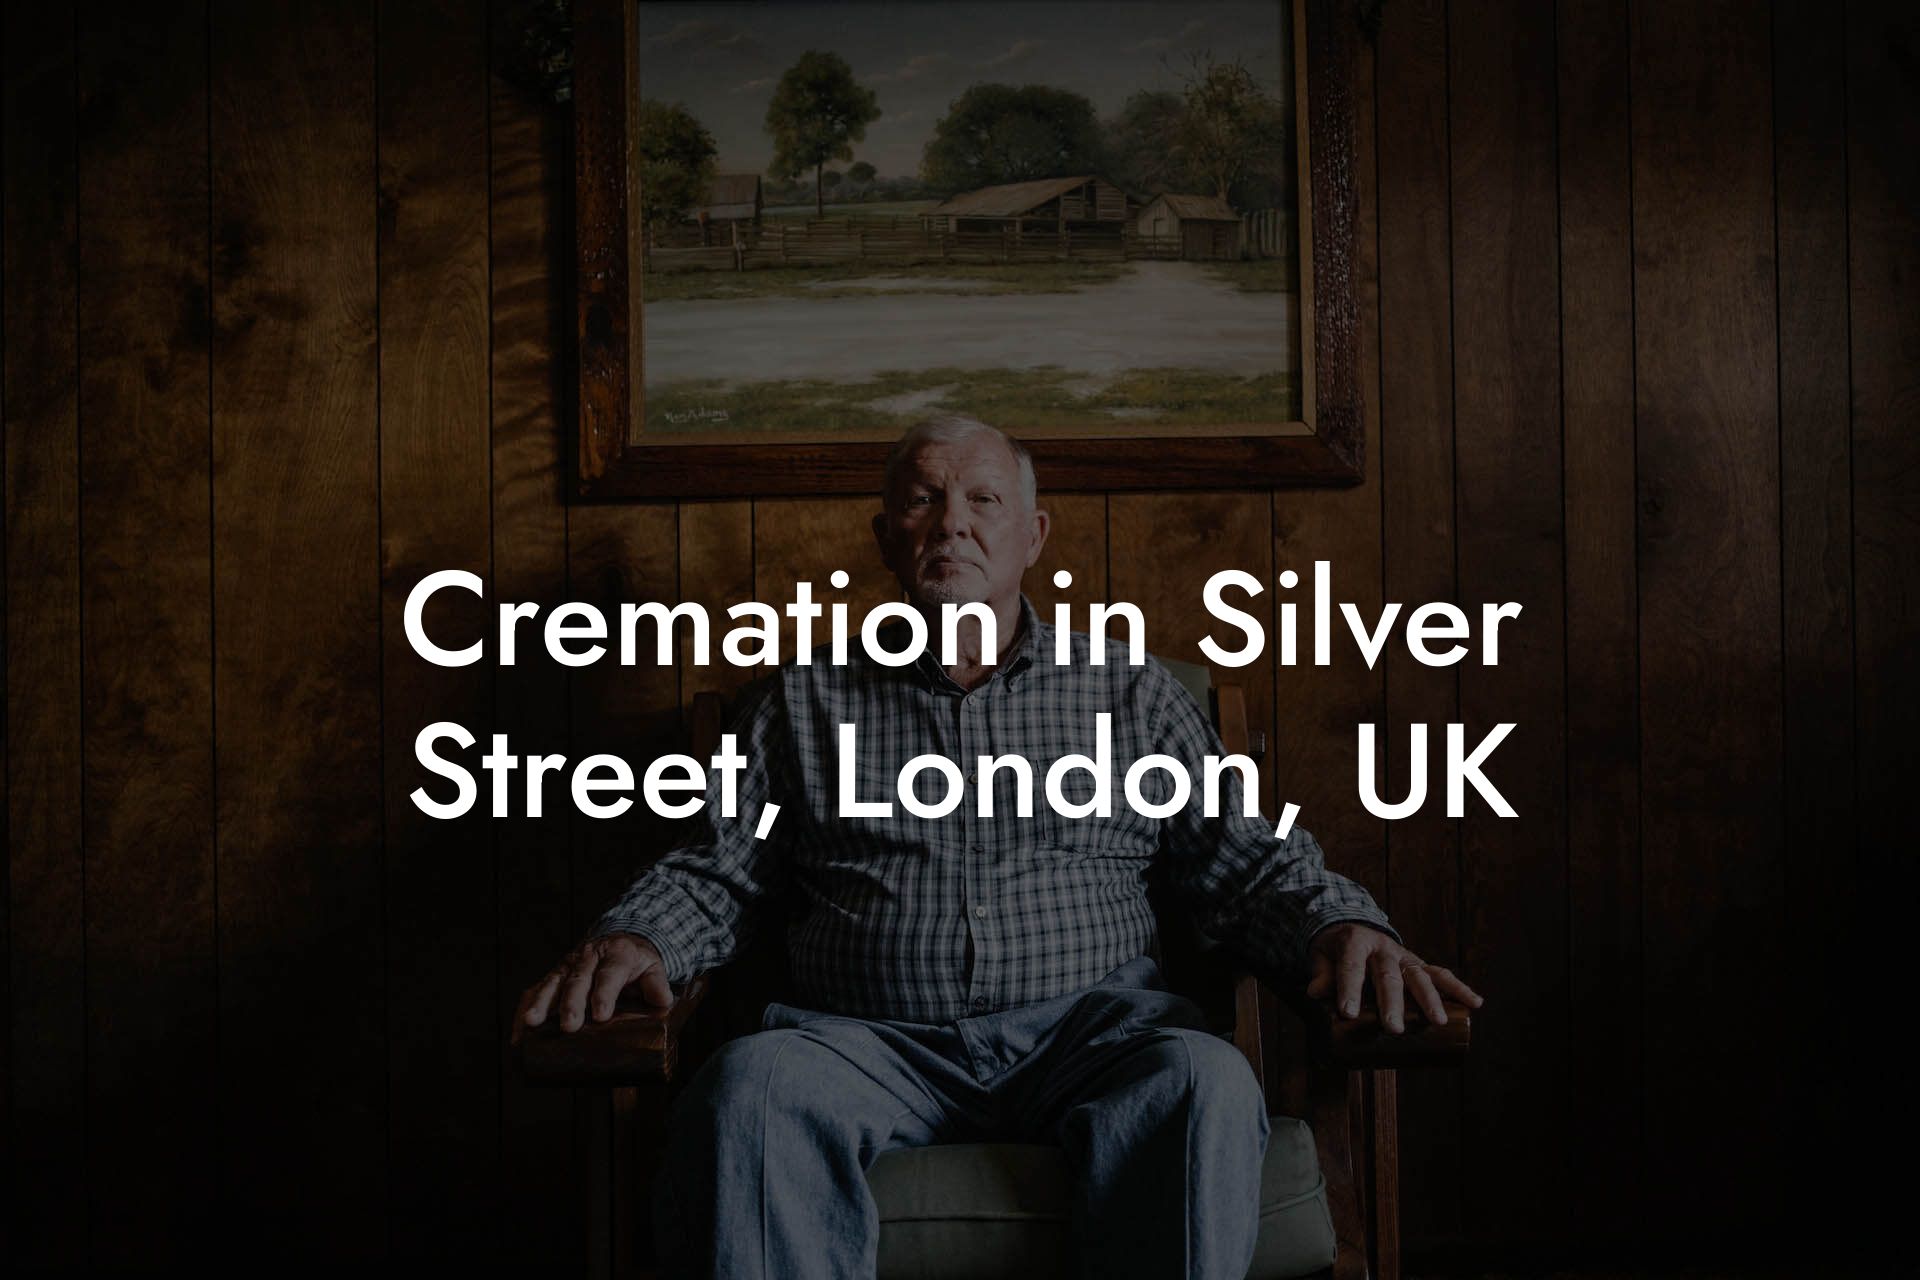 Cremation in Silver Street, London, UK